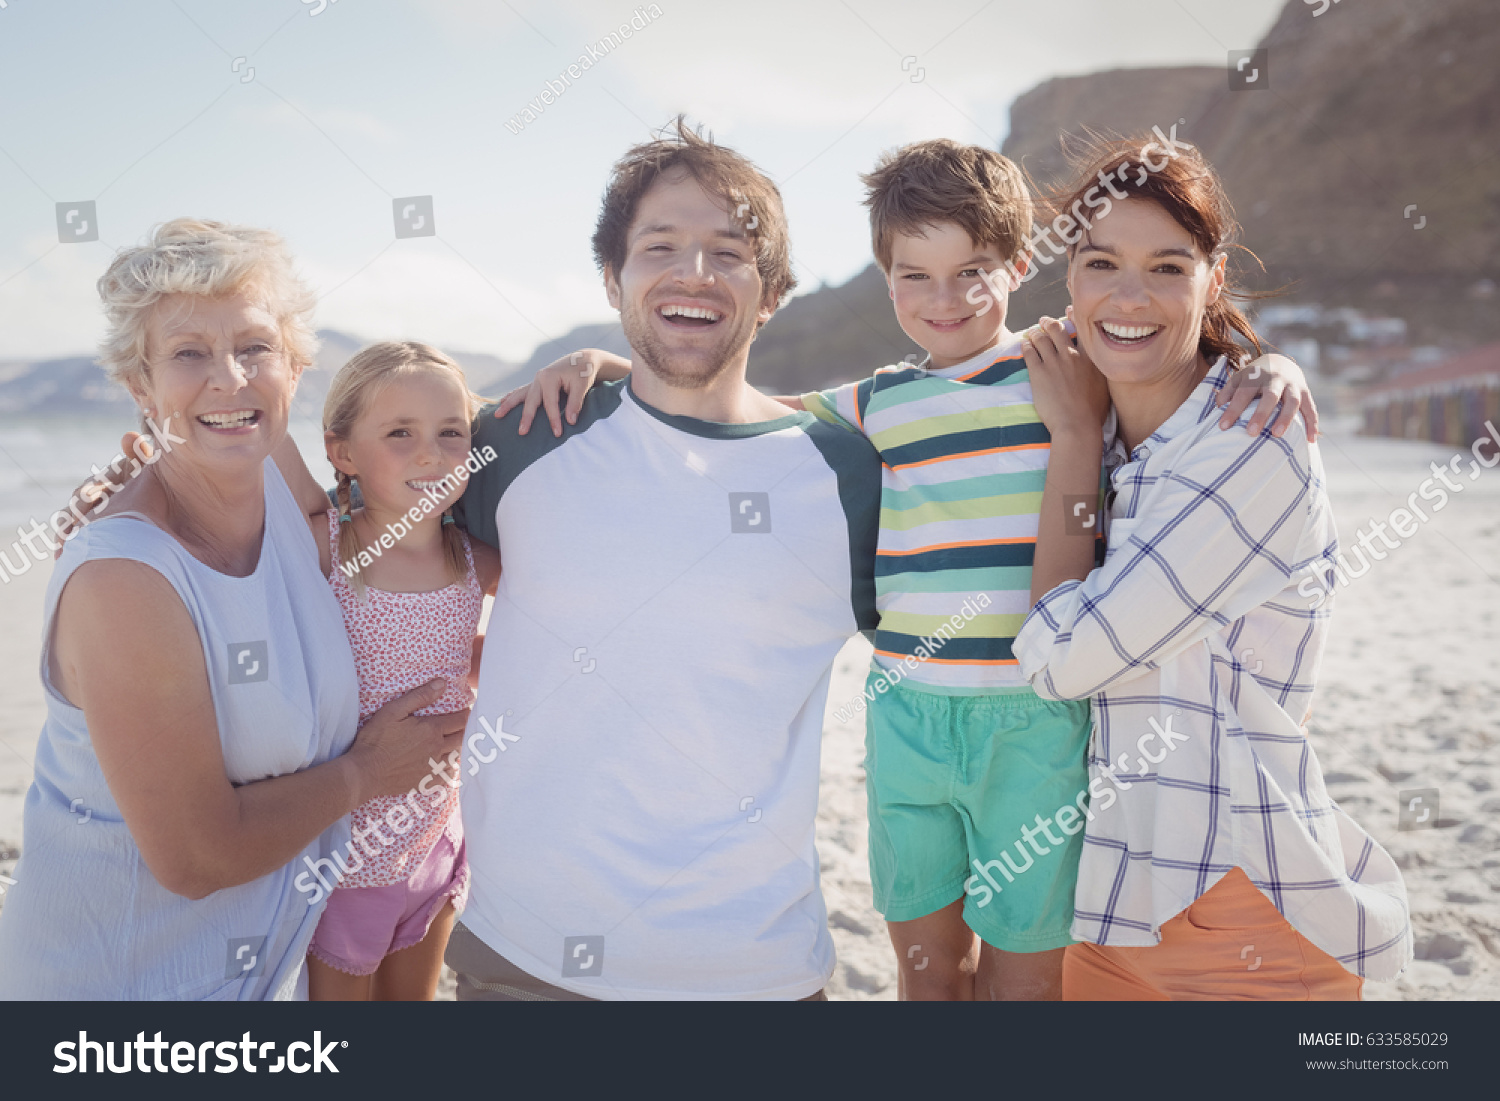 Portrait of multi-generated family embracing at beach during sunny day #633585029